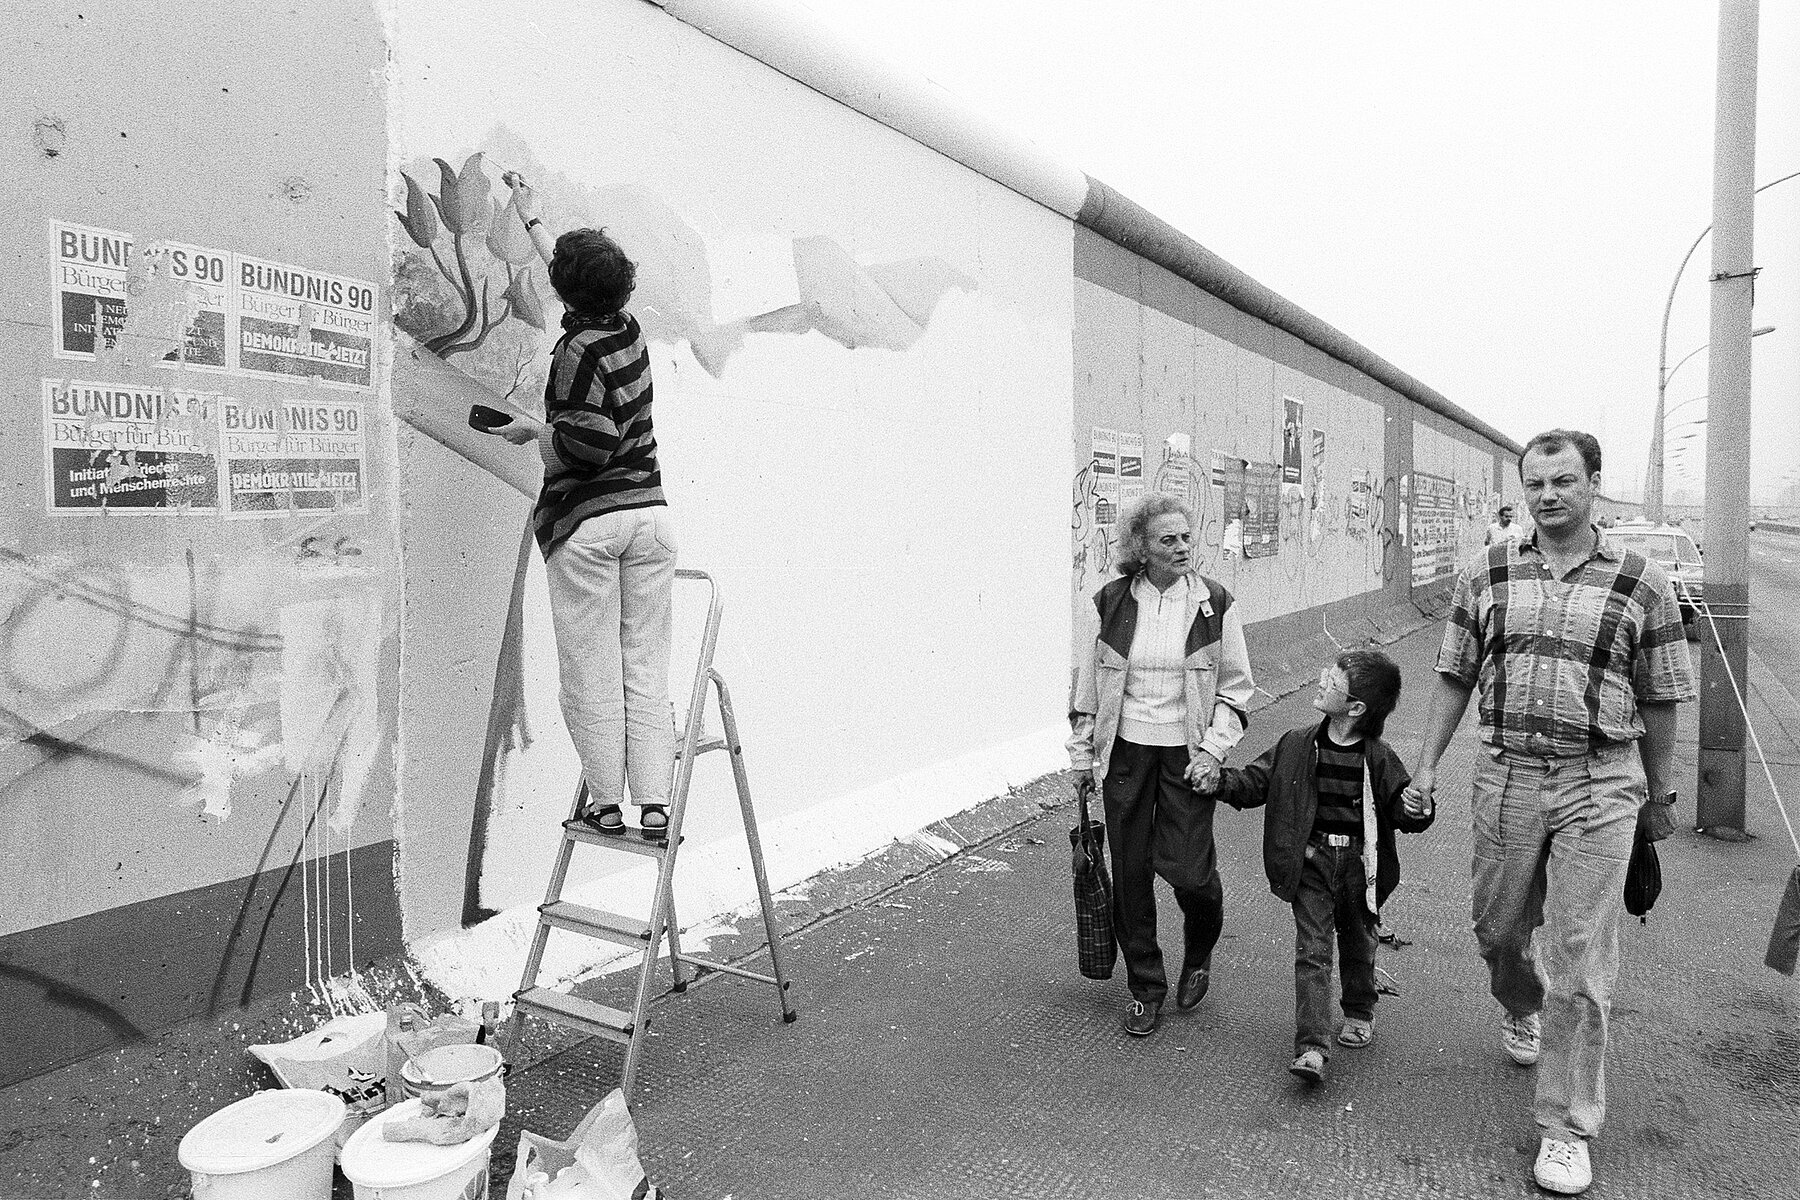 On the left, a person on a ladder painting a large picture on the wall. On the right, a family with a child passes by.